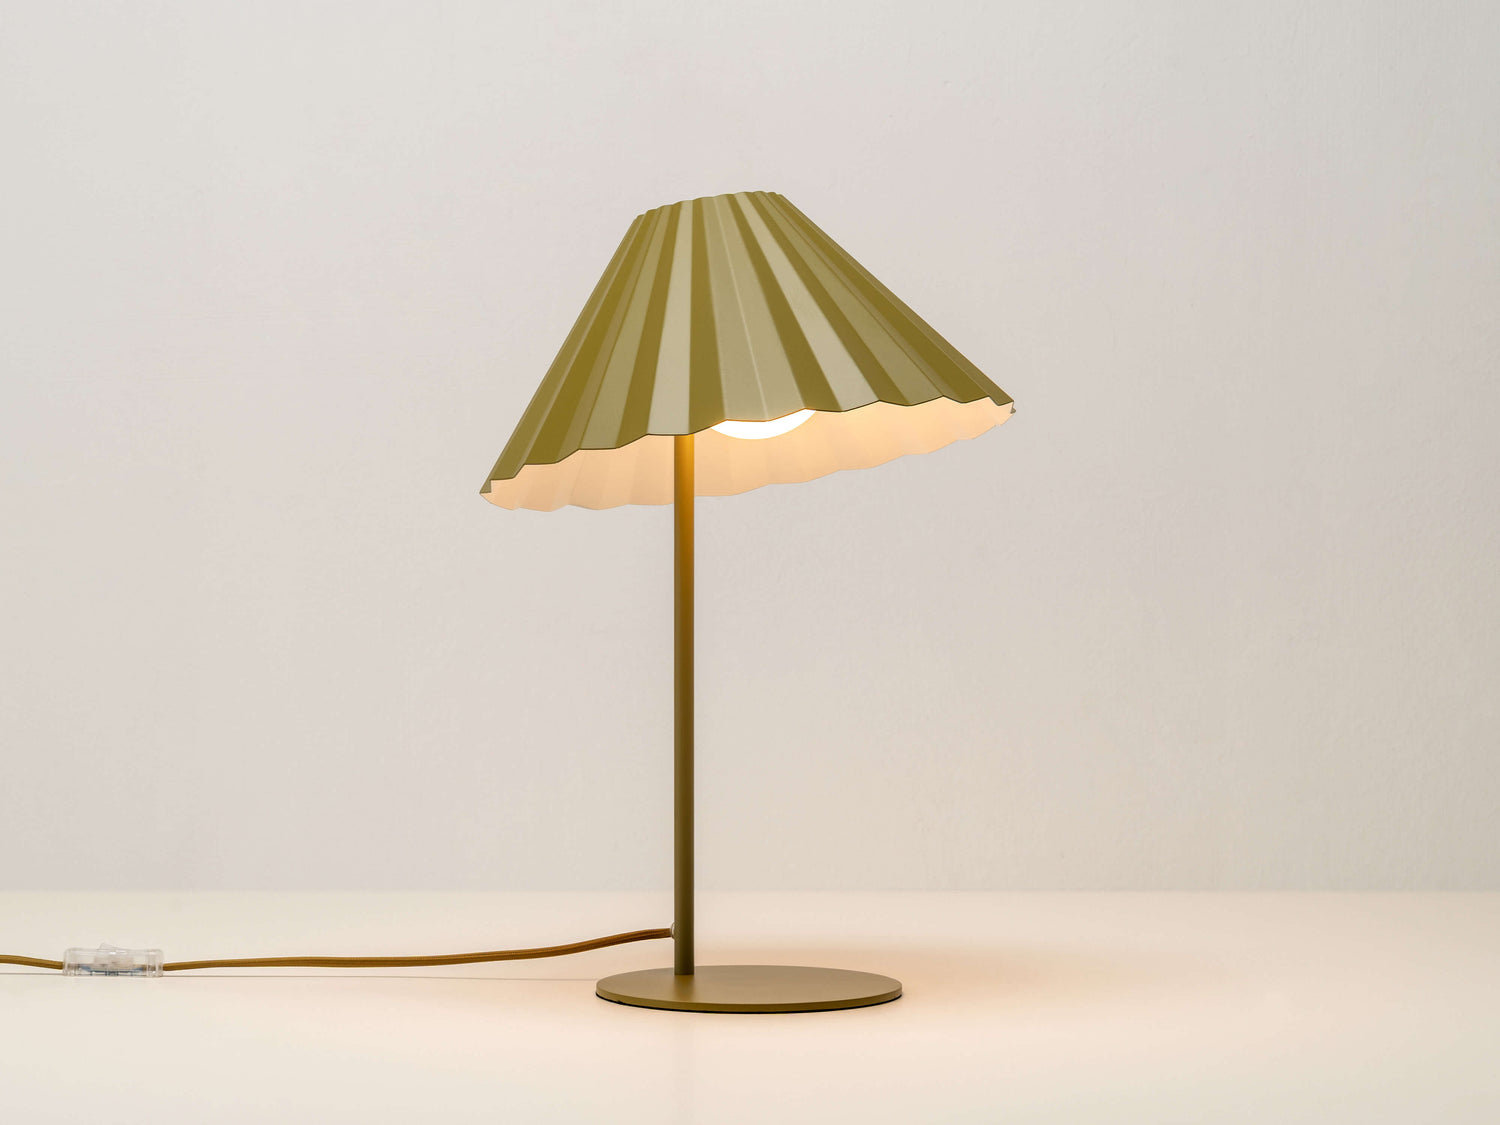 A table lamp with a fluted, pleated metal shade that can be tilted and adjusted. It is painted moss green, with a contrasting pale blue colour inside the shade. Light is on.